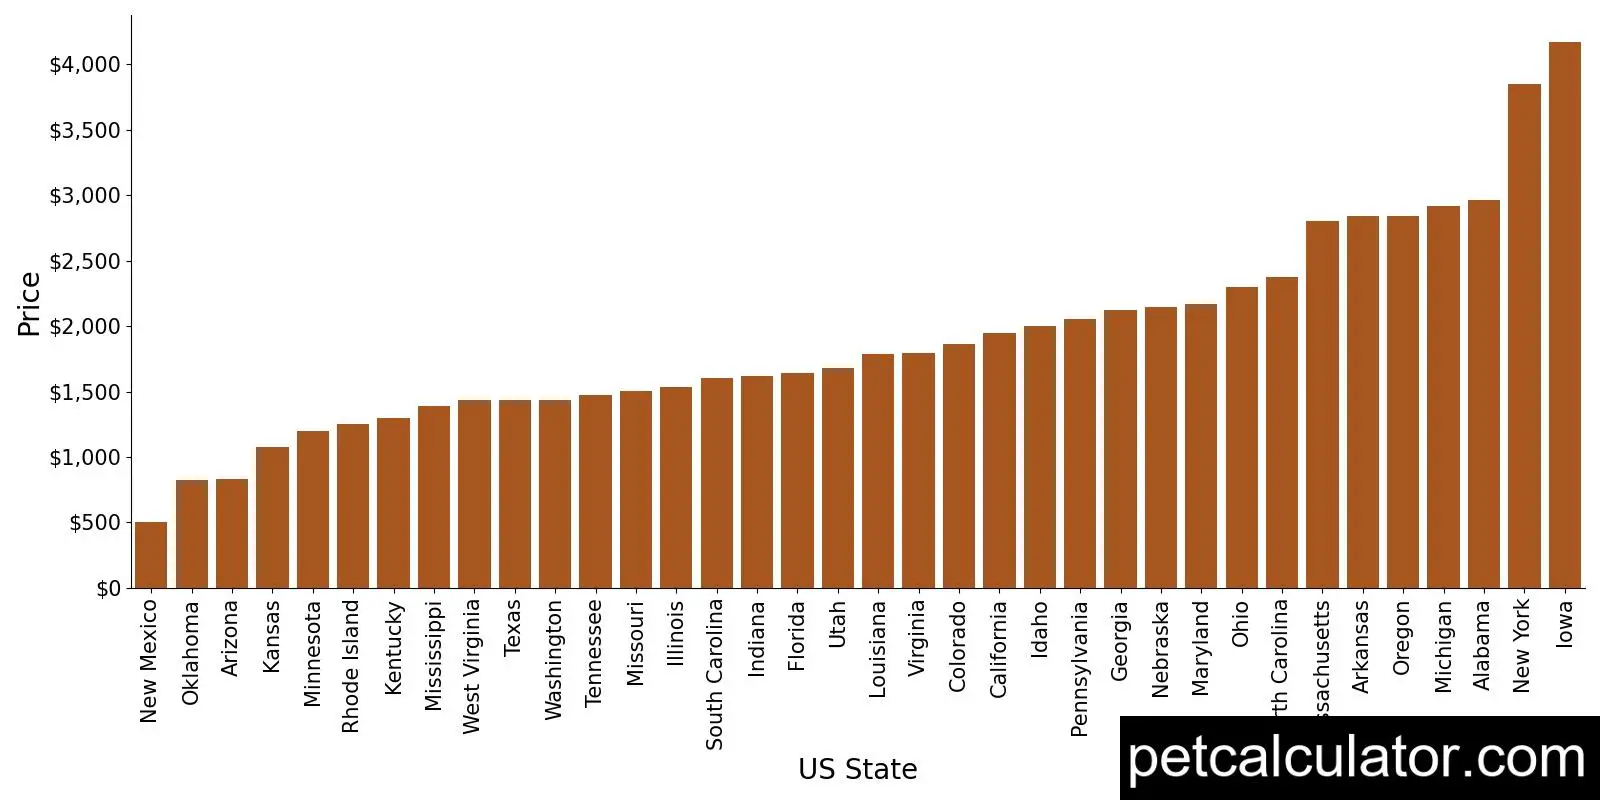 Price of Doberman Pinscher by US State 